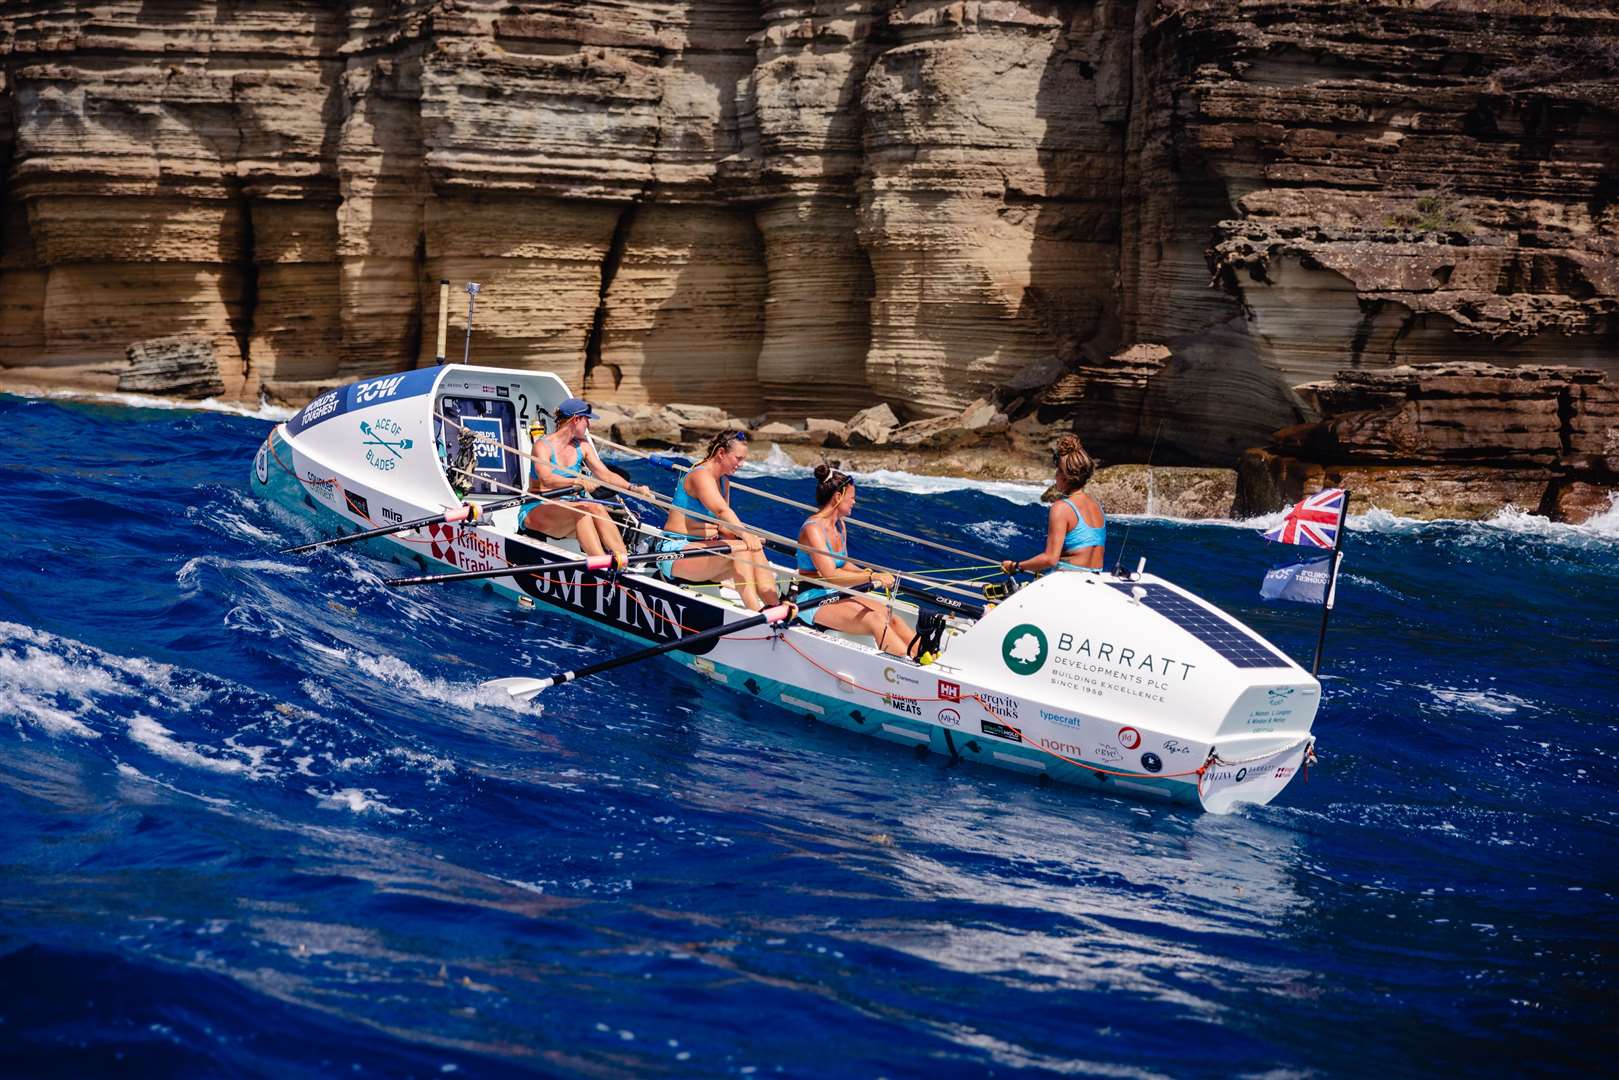 Liz Watson, Beth Motley, Katherine Windsor and Laura Langton completed the 3,000-mile rowing race in 47 days, 7 hours and 27 minutes. Picture: World’s Toughest Row